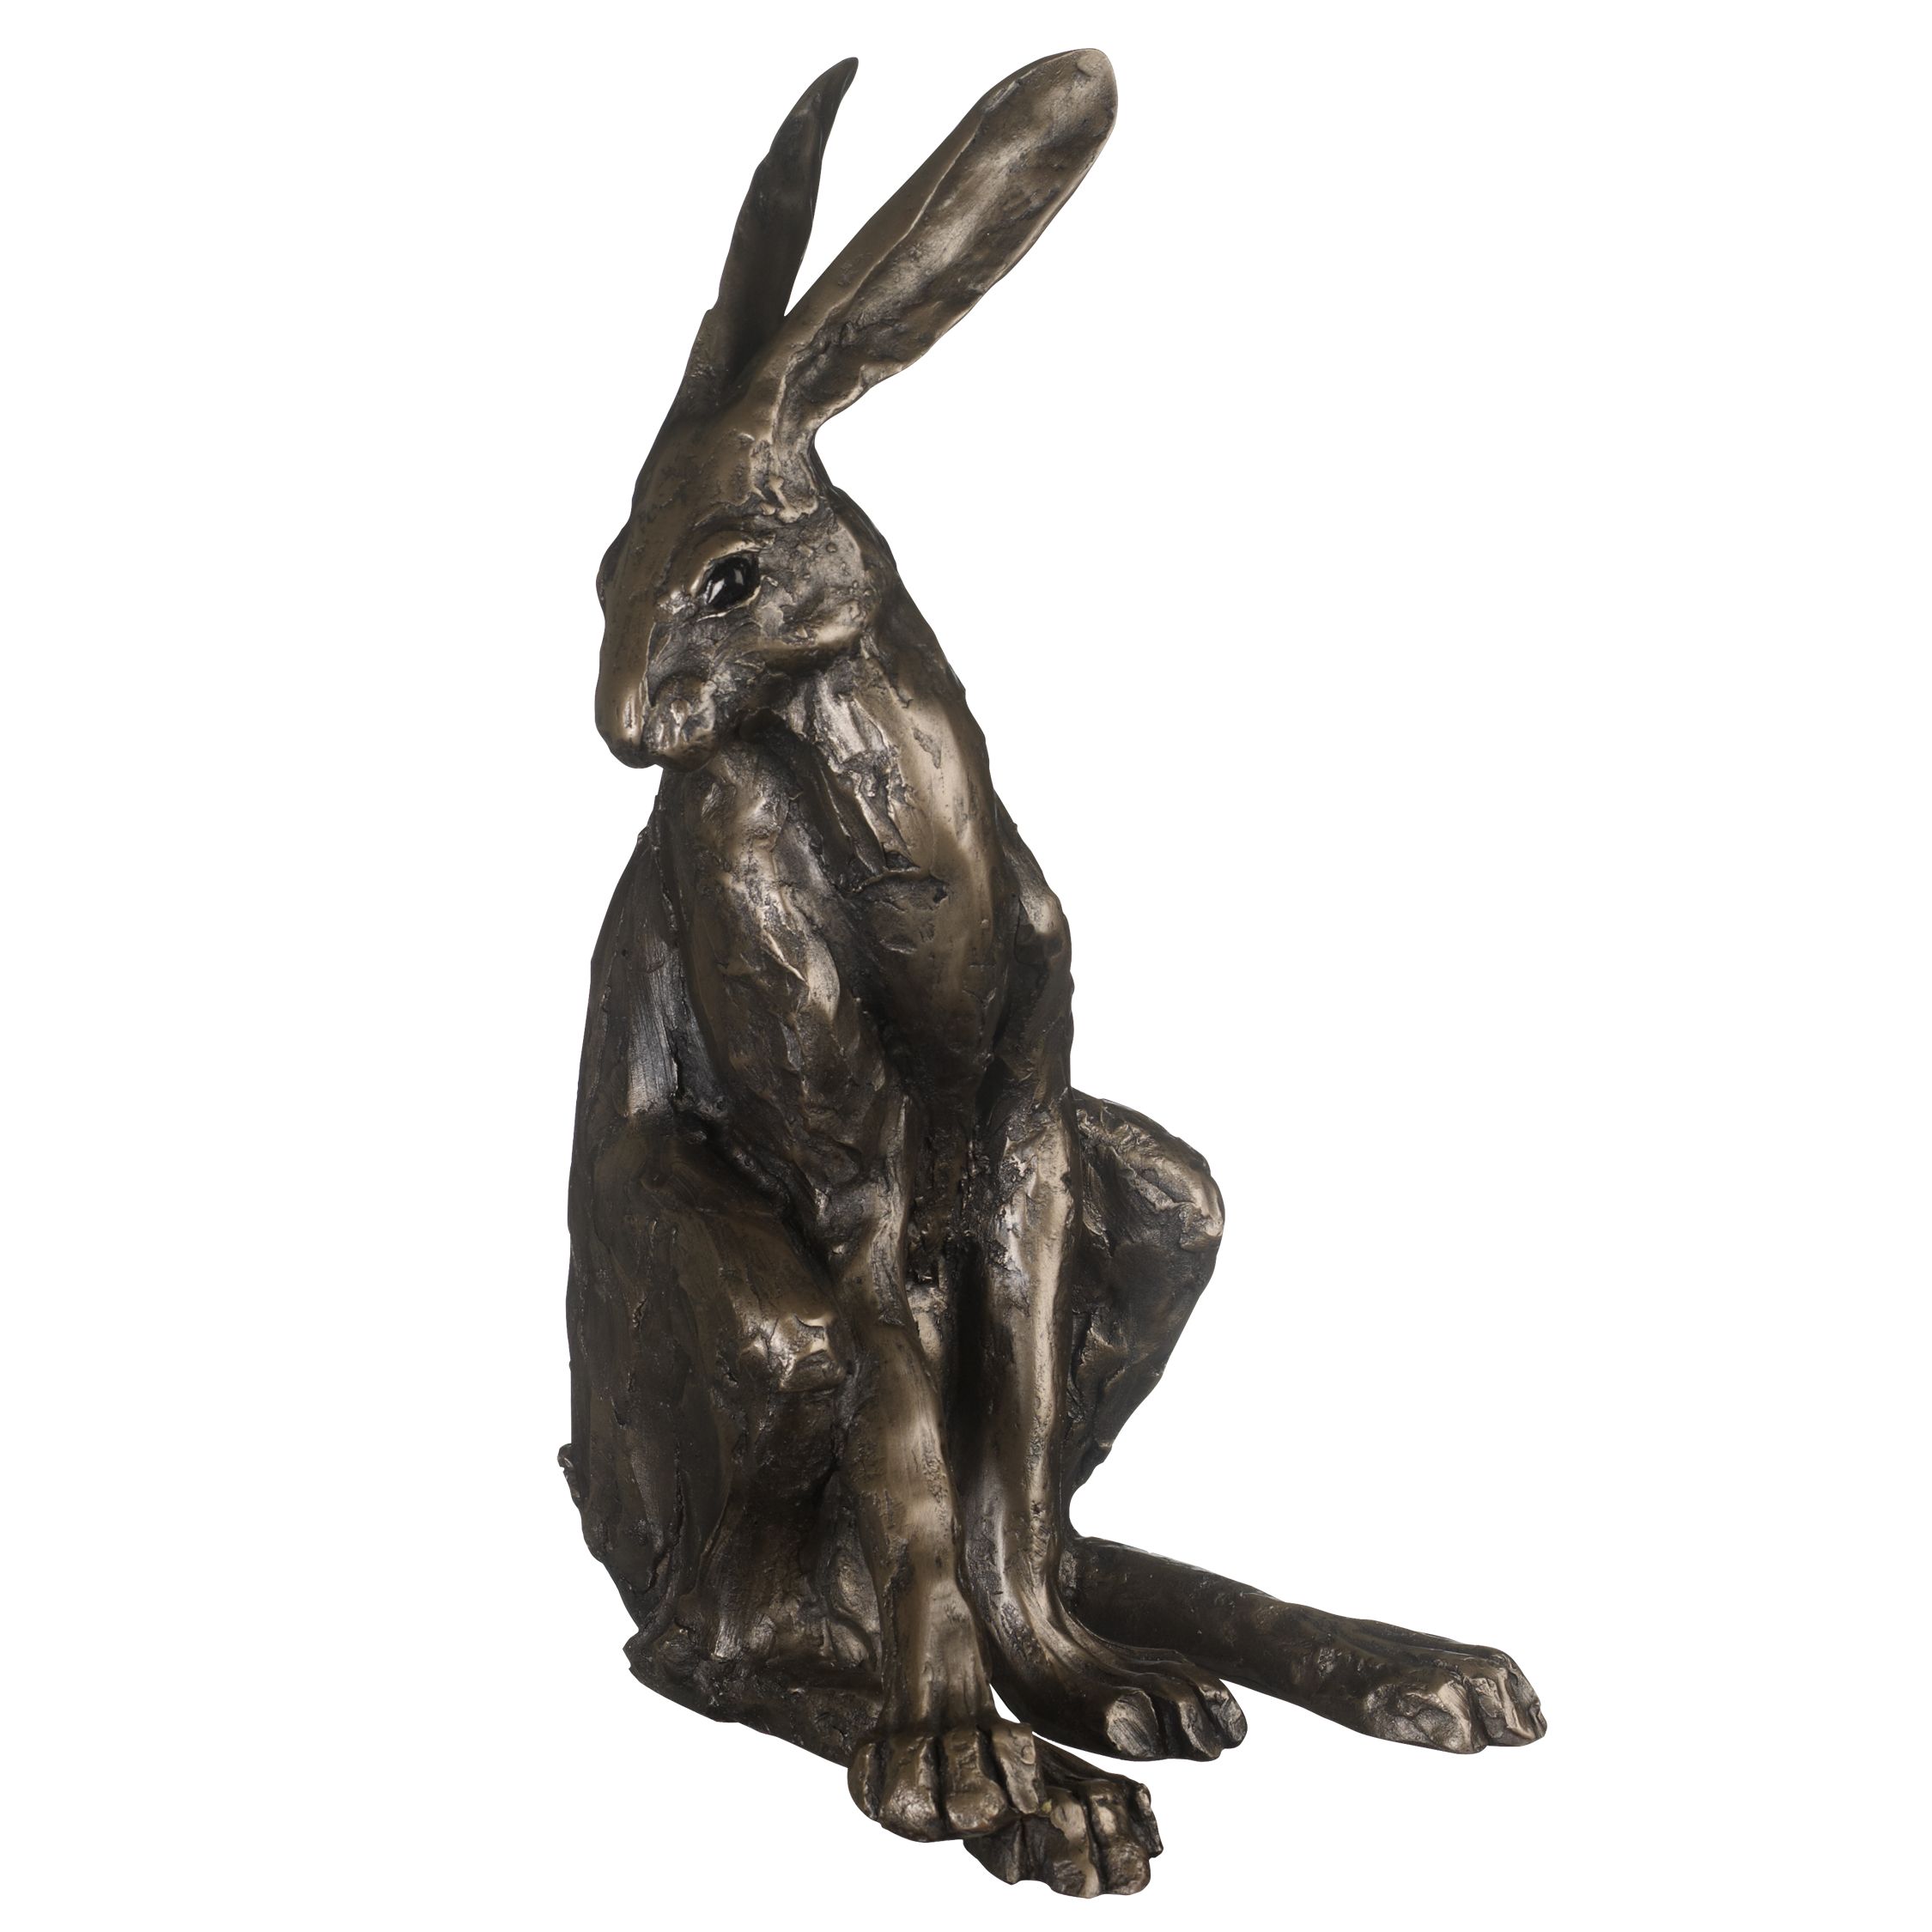 Hector Hare Sculpture at John Lewis